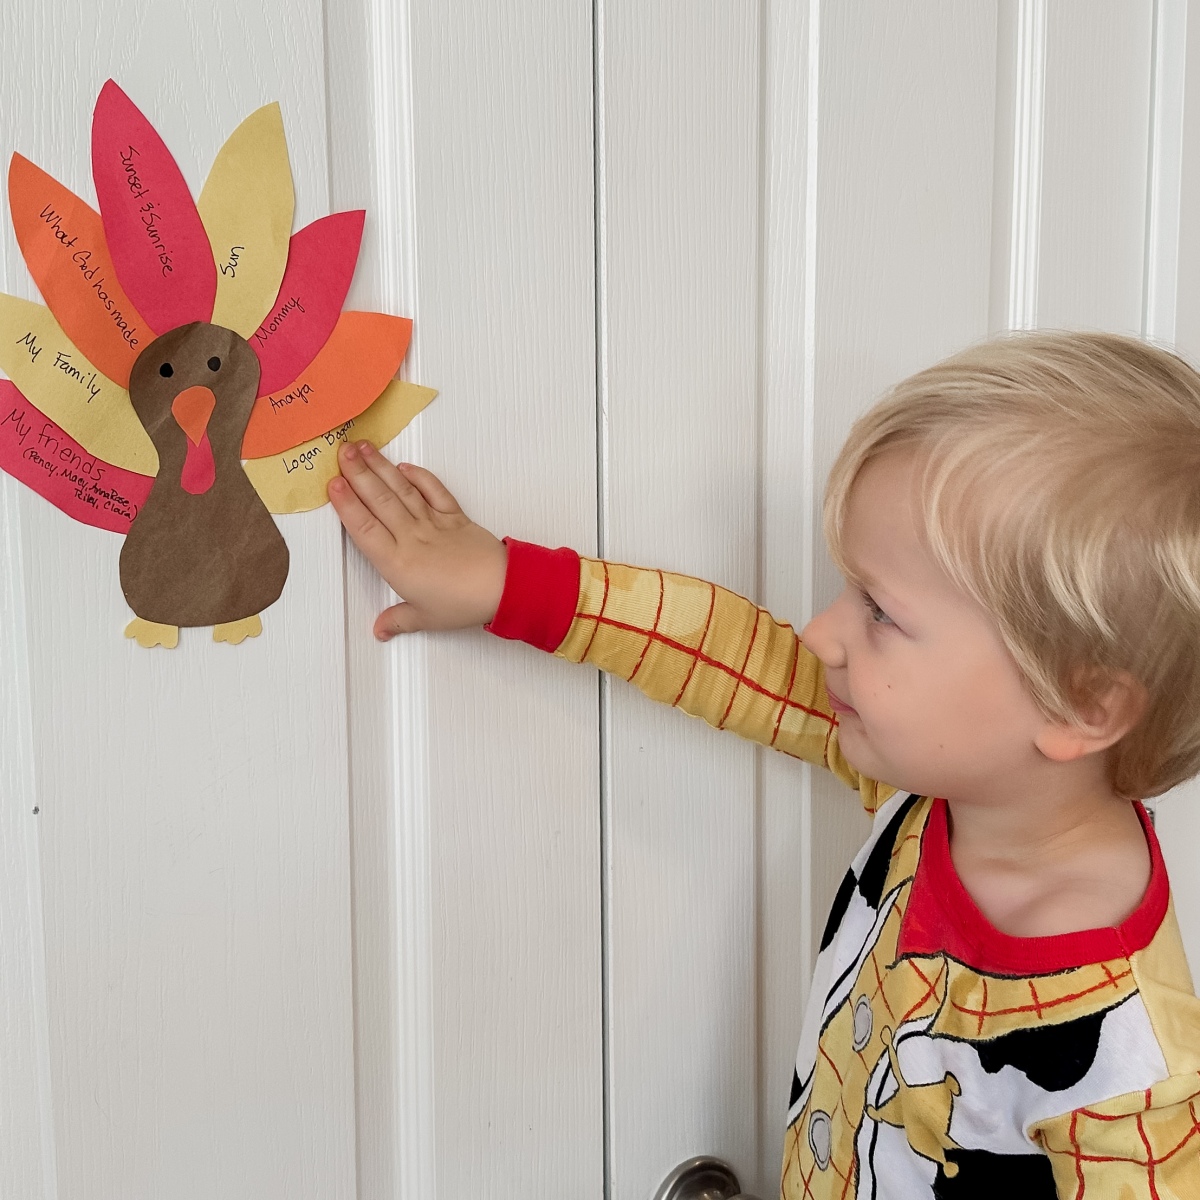 Forgetfulness: The Opposite of Thanksgiving